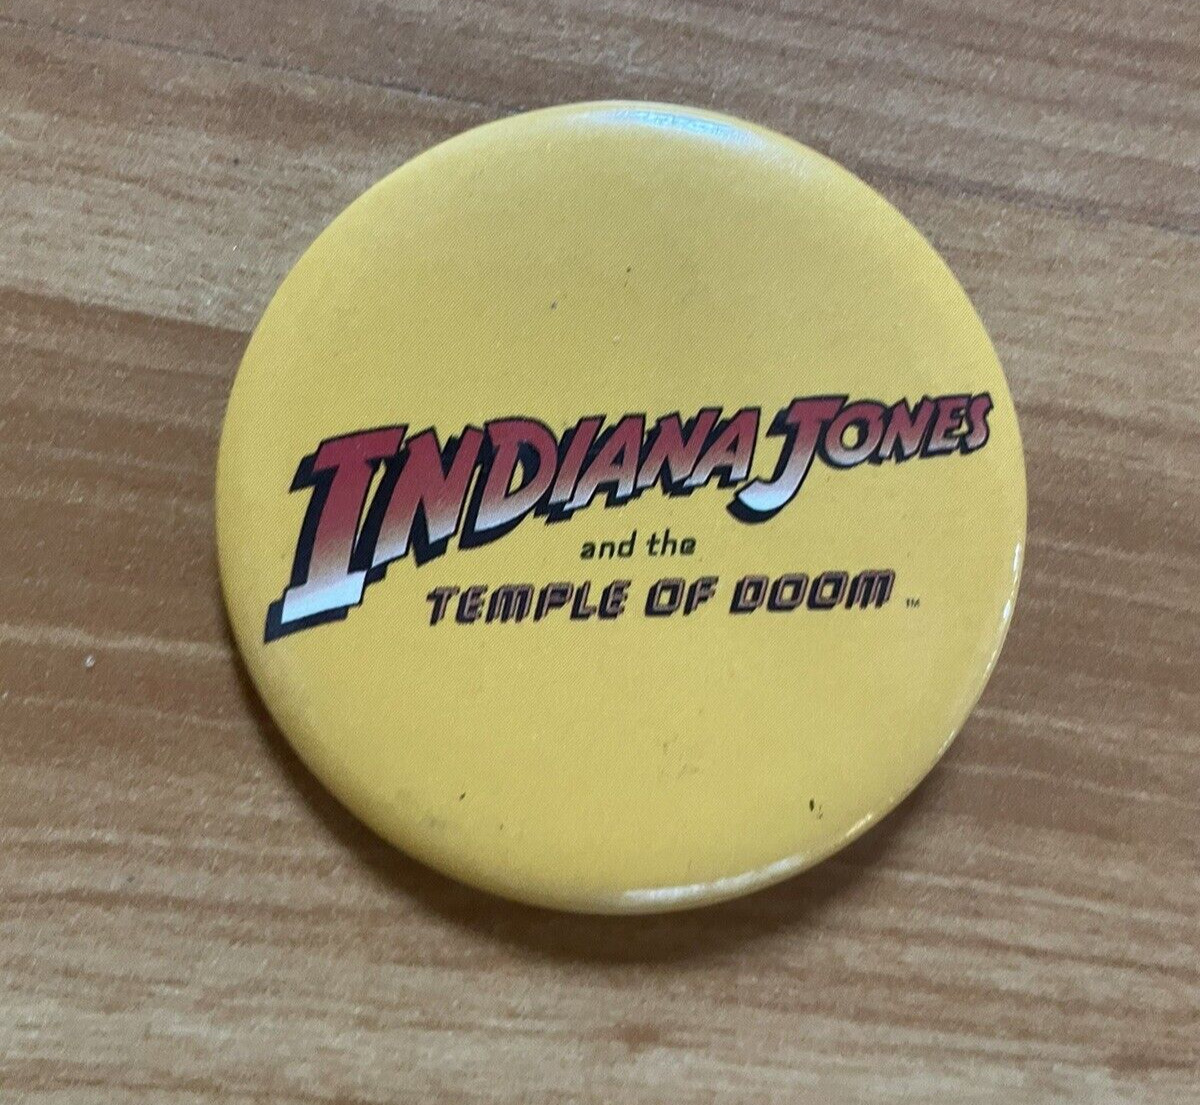 1984 INDIANA JONES AND THE TEMPLE OF DOOM movie pinback button Harrison Ford